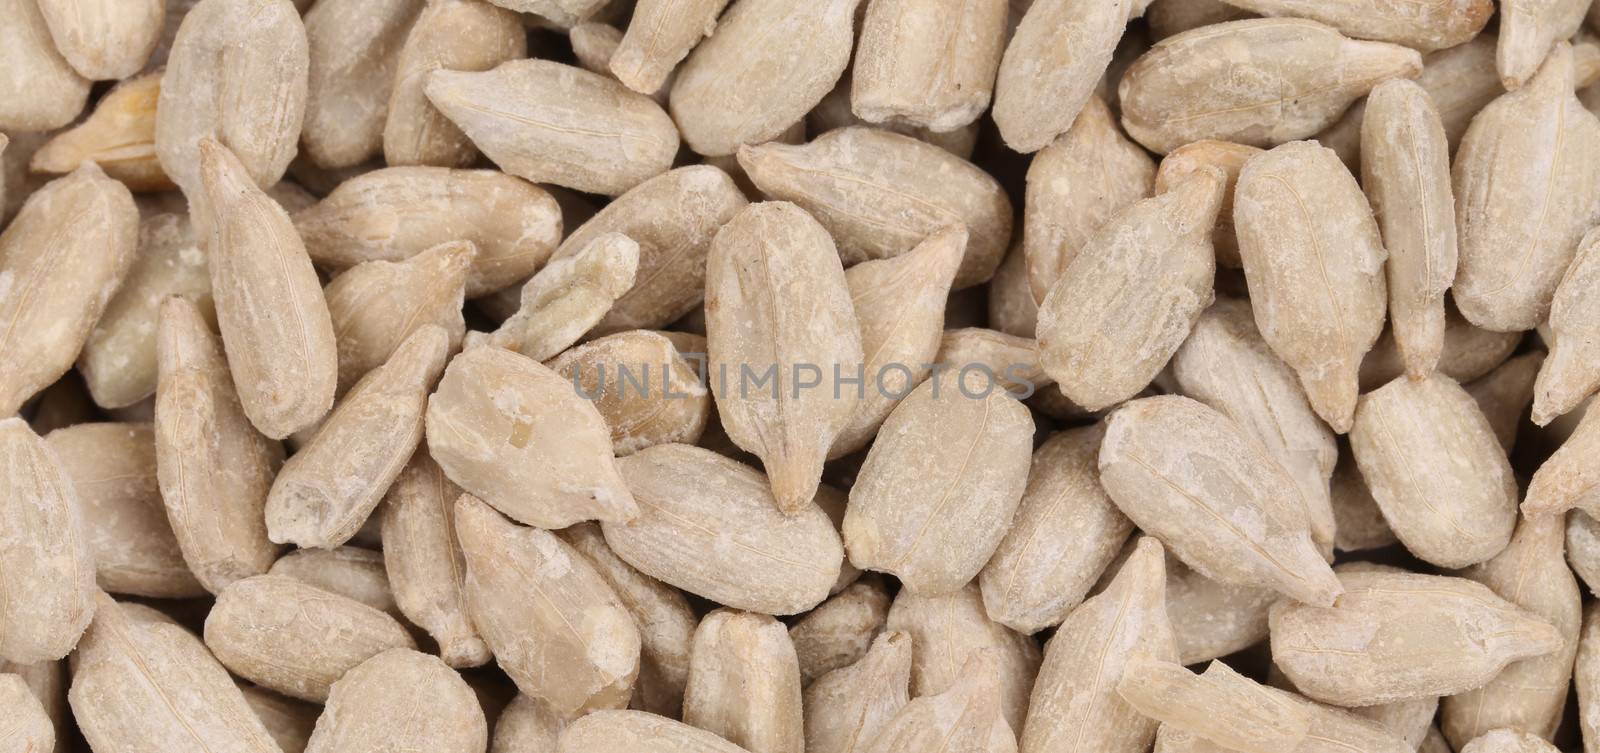 Background of sunflower seeds. by indigolotos